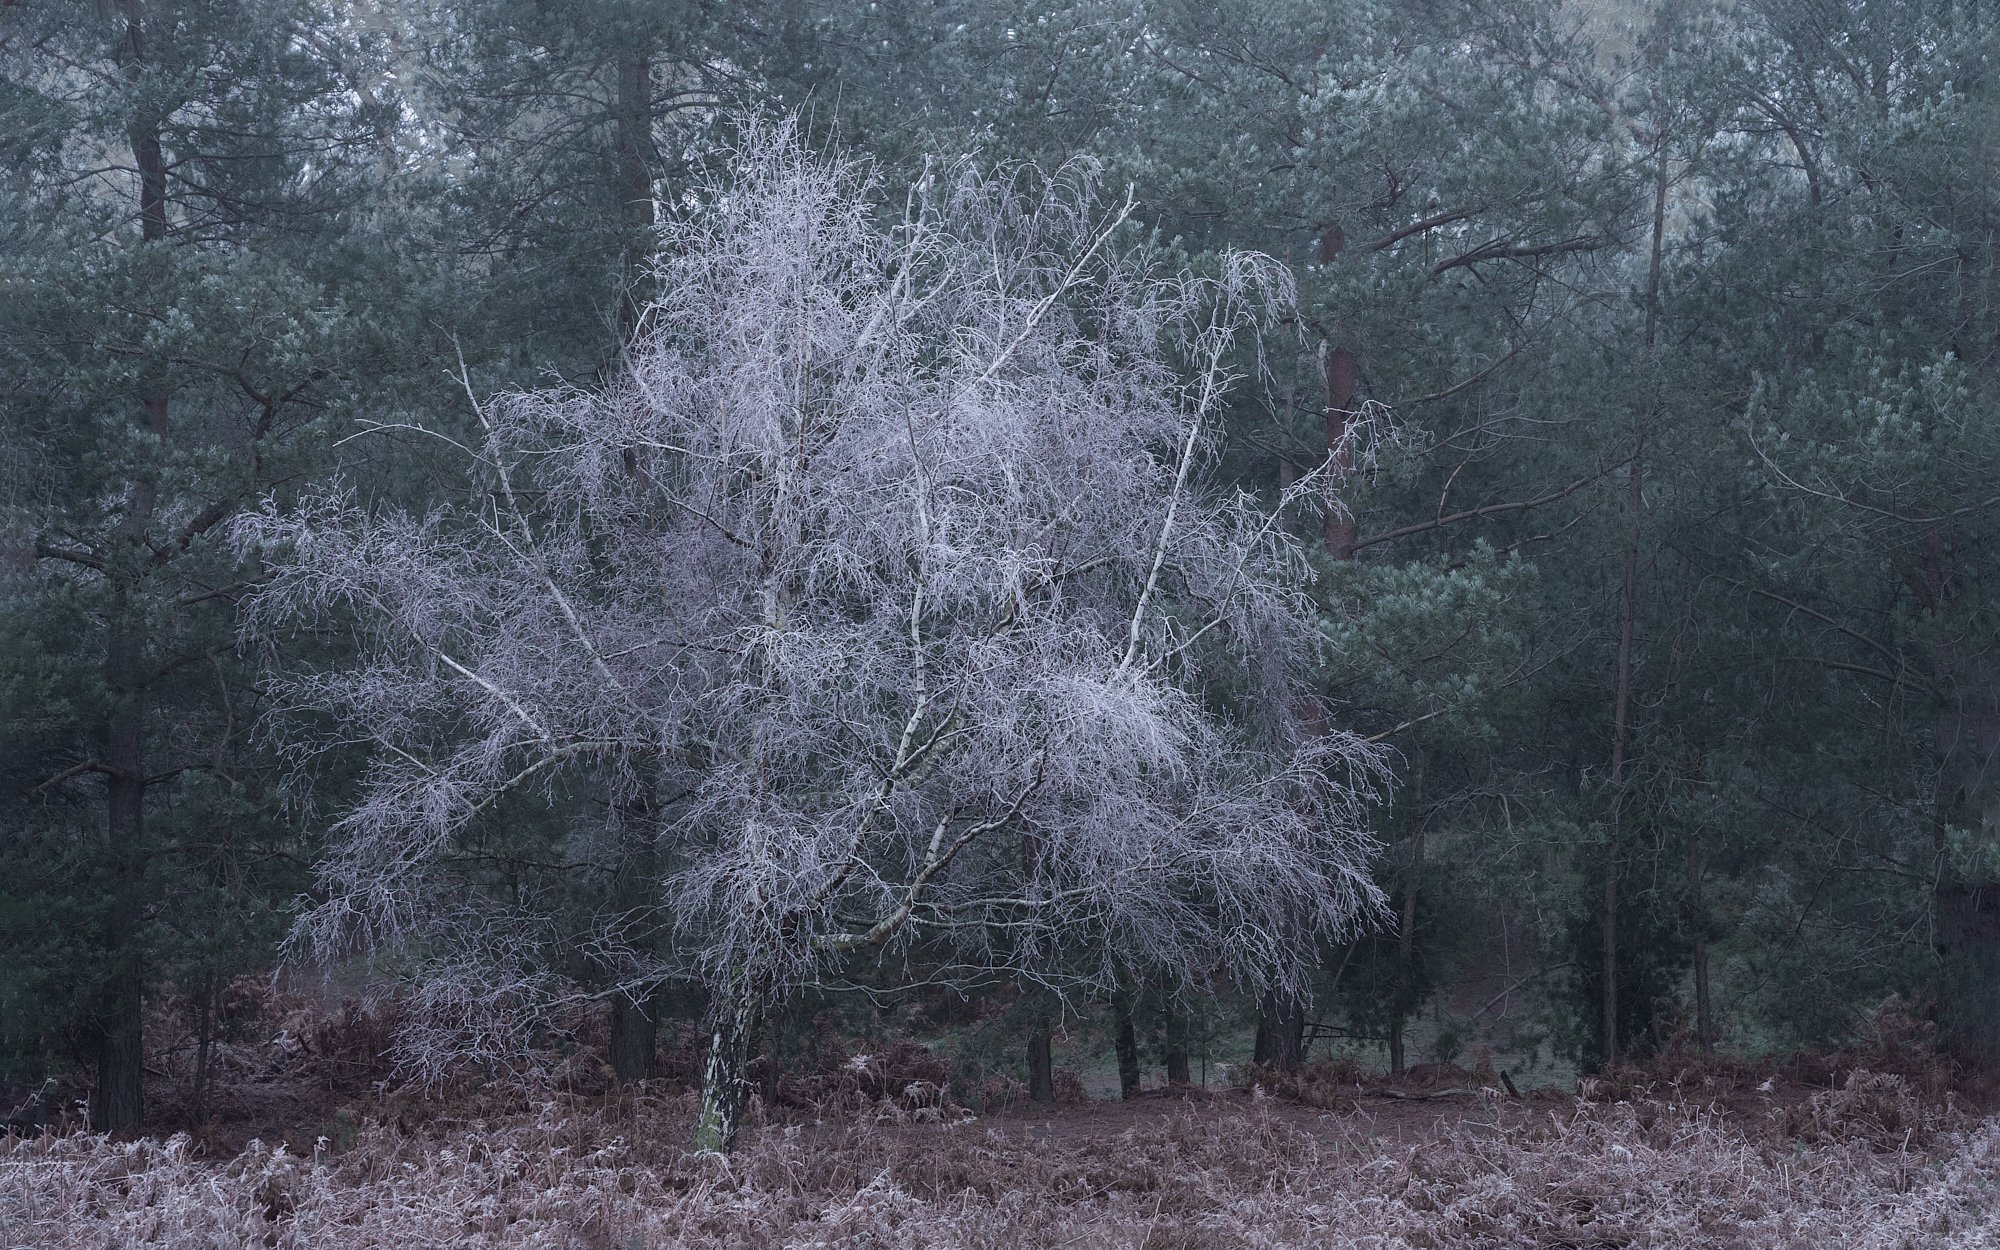  New Years Day treated me to a wonderful hoar frost, so I headed to a local woodland where this silver birch stood out amongst the pine trees 